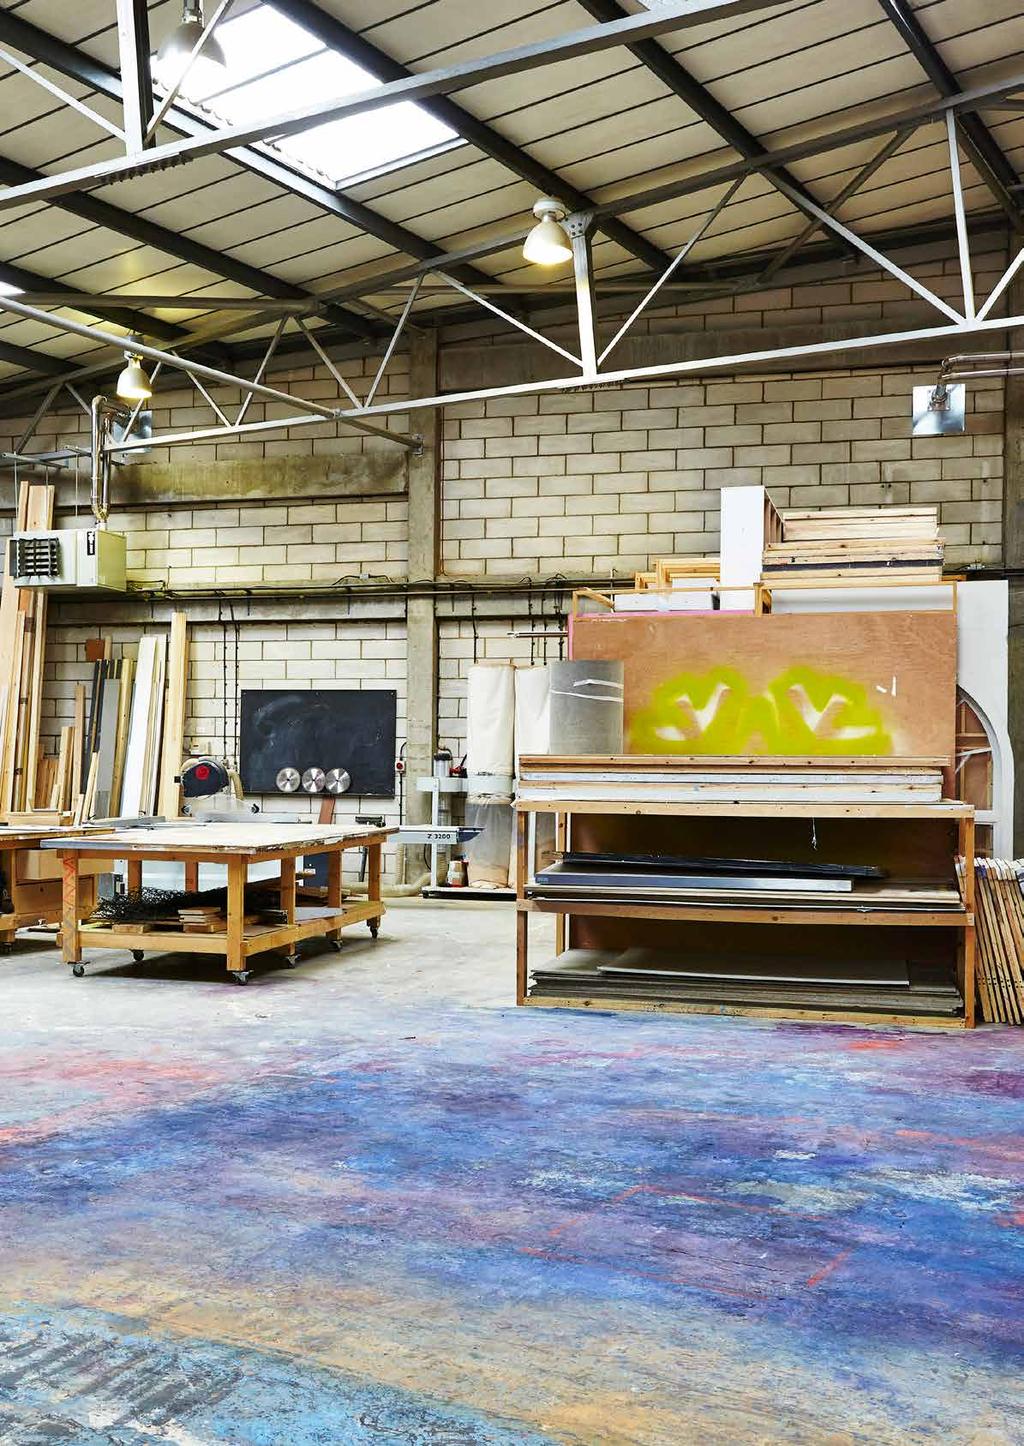 The Workshop Based out of a 4,000 sqft workshop on York Way, just 5 minutes walk from the main studios.